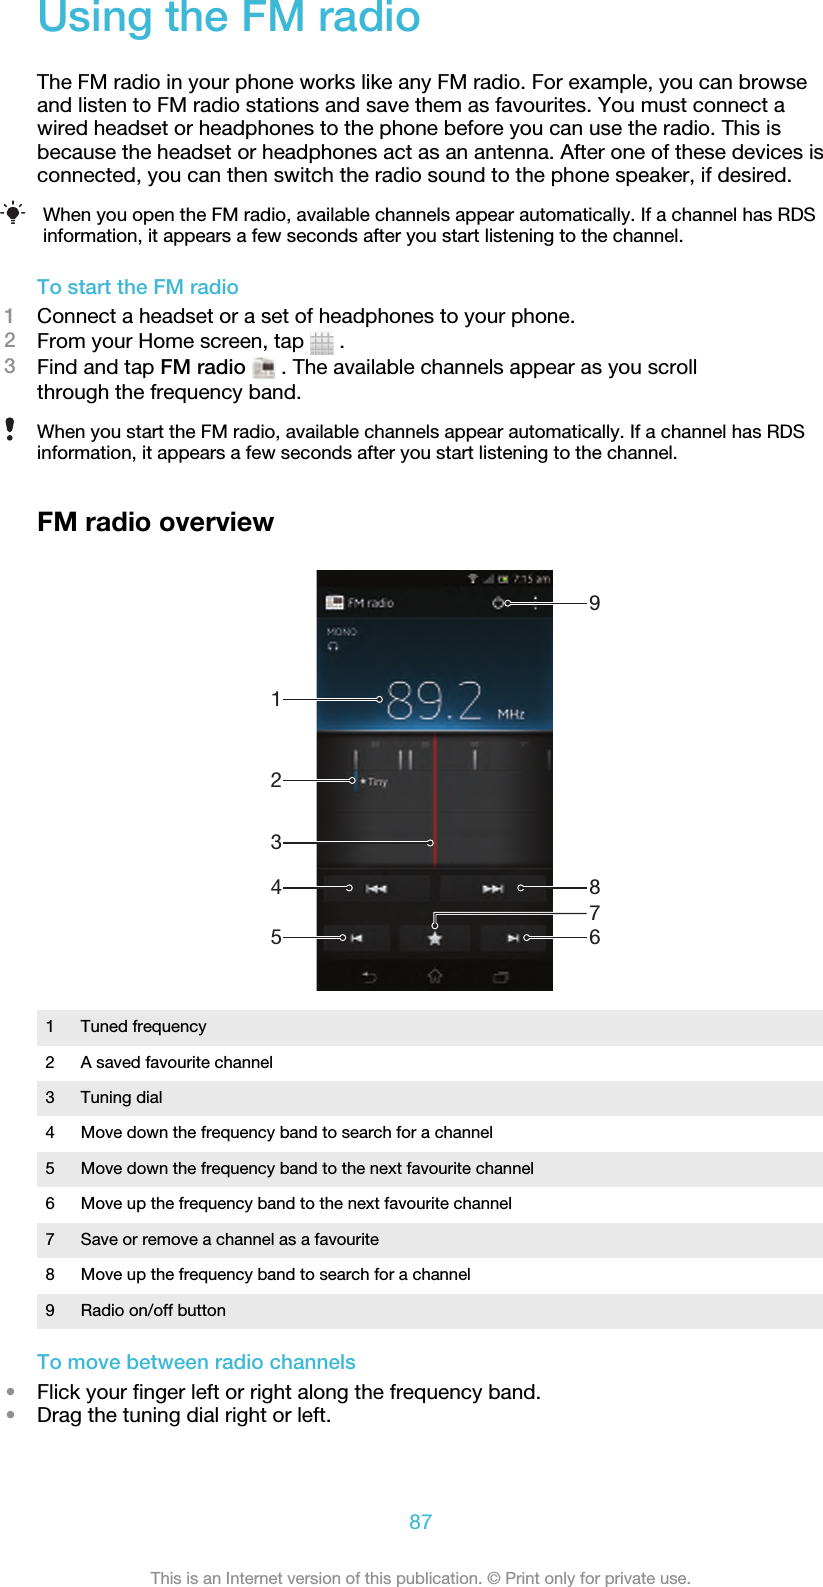 Using the FM radioThe FM radio in your phone works like any FM radio. For example, you can browseand listen to FM radio stations and save them as favourites. You must connect awired headset or headphones to the phone before you can use the radio. This isbecause the headset or headphones act as an antenna. After one of these devices isconnected, you can then switch the radio sound to the phone speaker, if desired.When you open the FM radio, available channels appear automatically. If a channel has RDSinformation, it appears a few seconds after you start listening to the channel.To start the FM radio1Connect a headset or a set of headphones to your phone.2From your Home screen, tap   .3Find and tap FM radio  . The available channels appear as you scrollthrough the frequency band.When you start the FM radio, available channels appear automatically. If a channel has RDSinformation, it appears a few seconds after you start listening to the channel.FM radio overview9861254371Tuned frequency2 A saved favourite channel3 Tuning dial4 Move down the frequency band to search for a channel5 Move down the frequency band to the next favourite channel6 Move up the frequency band to the next favourite channel7 Save or remove a channel as a favourite8 Move up the frequency band to search for a channel9 Radio on/off buttonTo move between radio channels•Flick your finger left or right along the frequency band.•Drag the tuning dial right or left.87This is an Internet version of this publication. © Print only for private use.